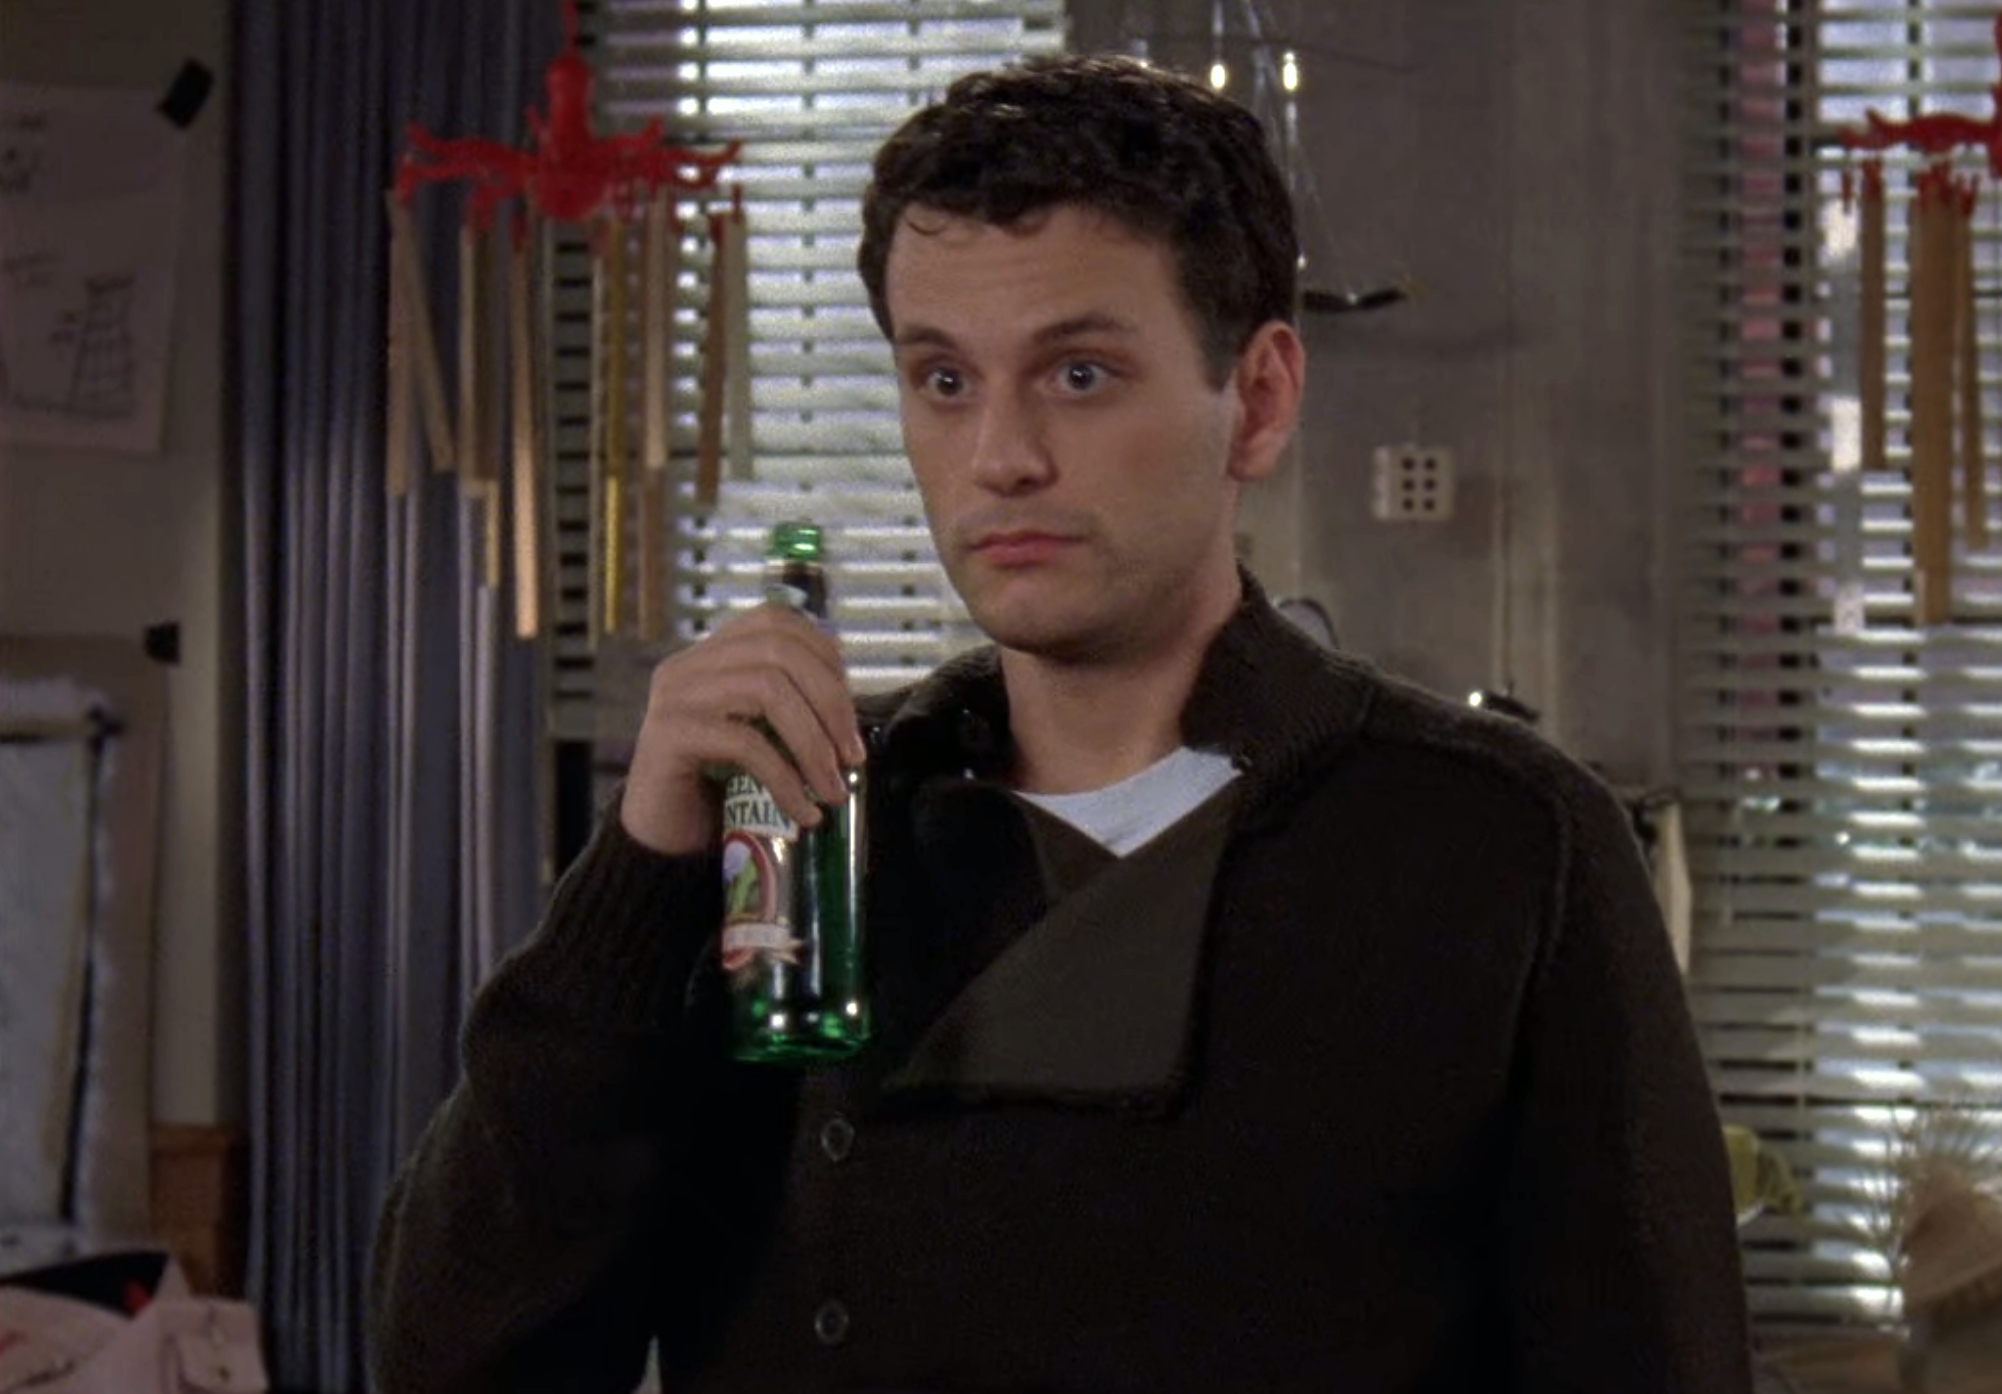 https://www.womaninrevolt.com/content/images/2022/09/Marty-drinking-beer-Knit-People-Knit-Gilmore-Girls.png